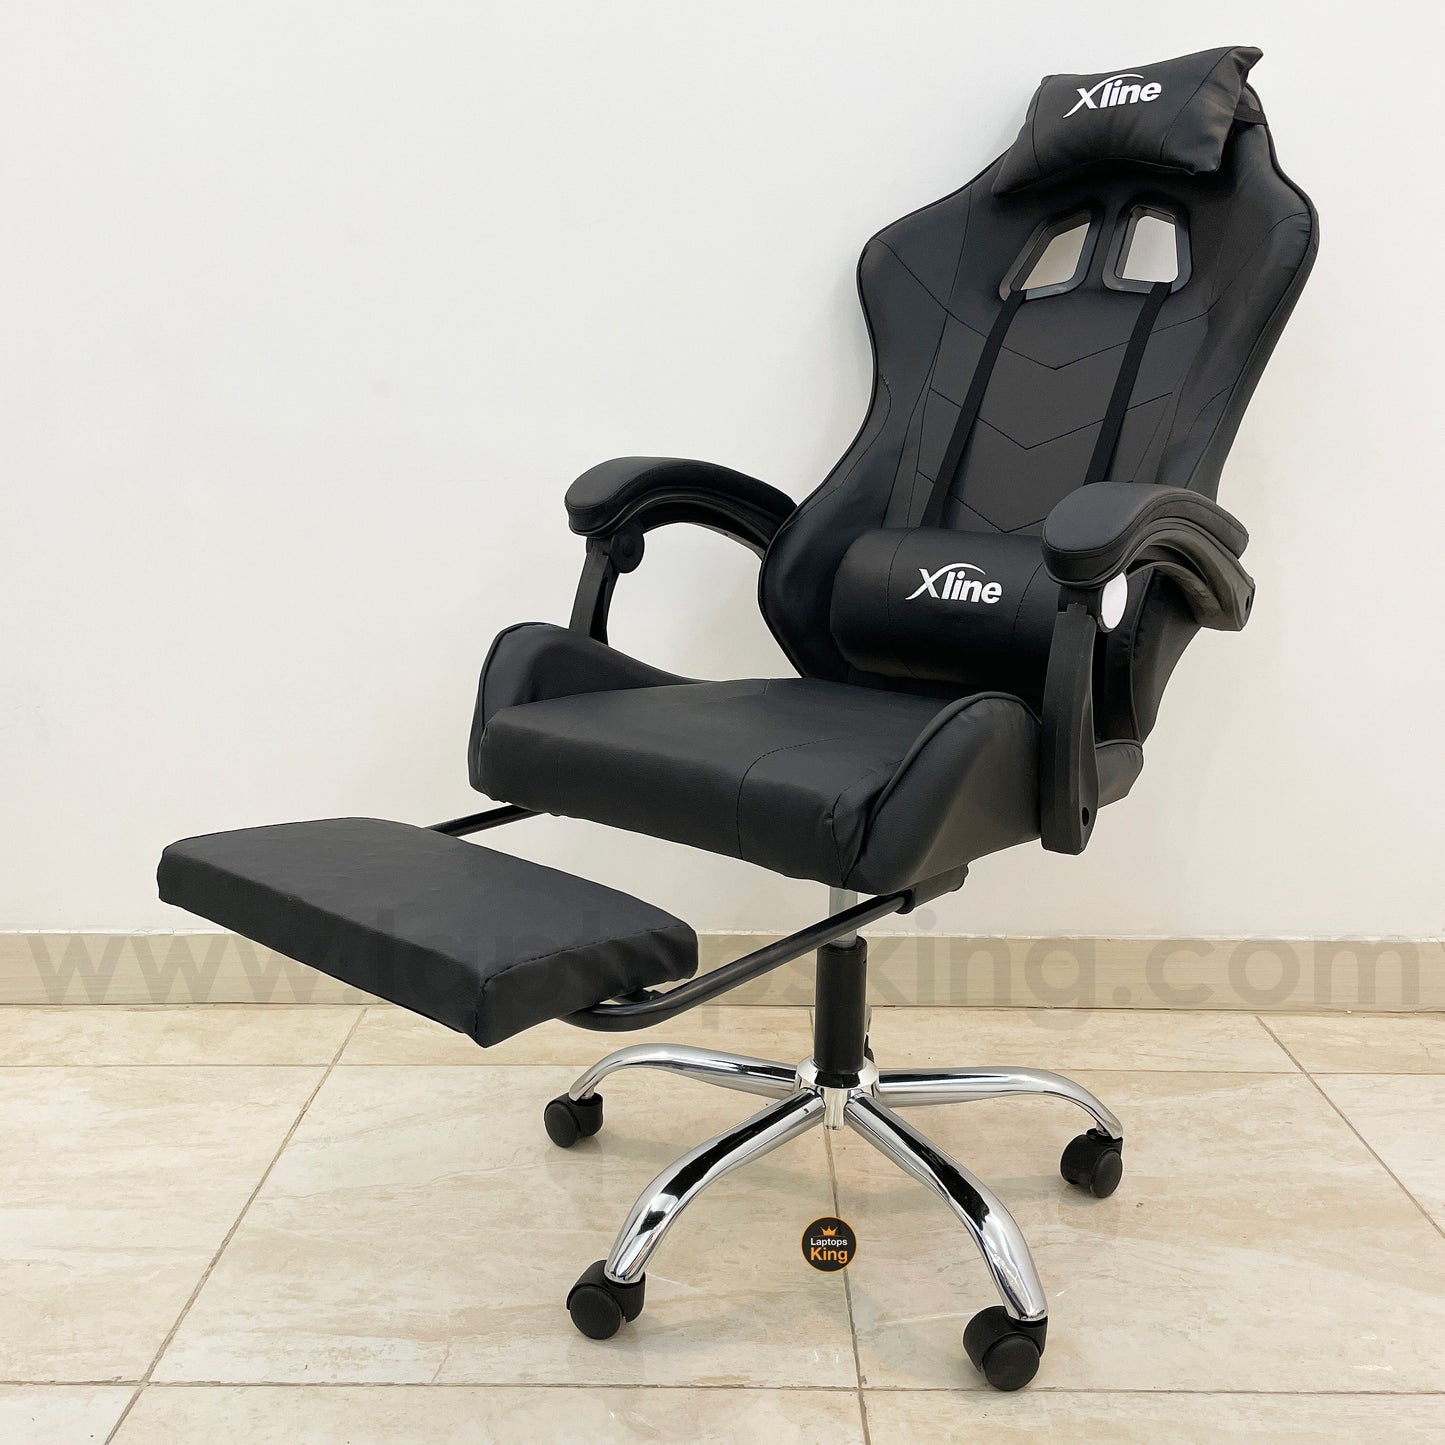 Xline X920 Gaming Chair (Brand New)